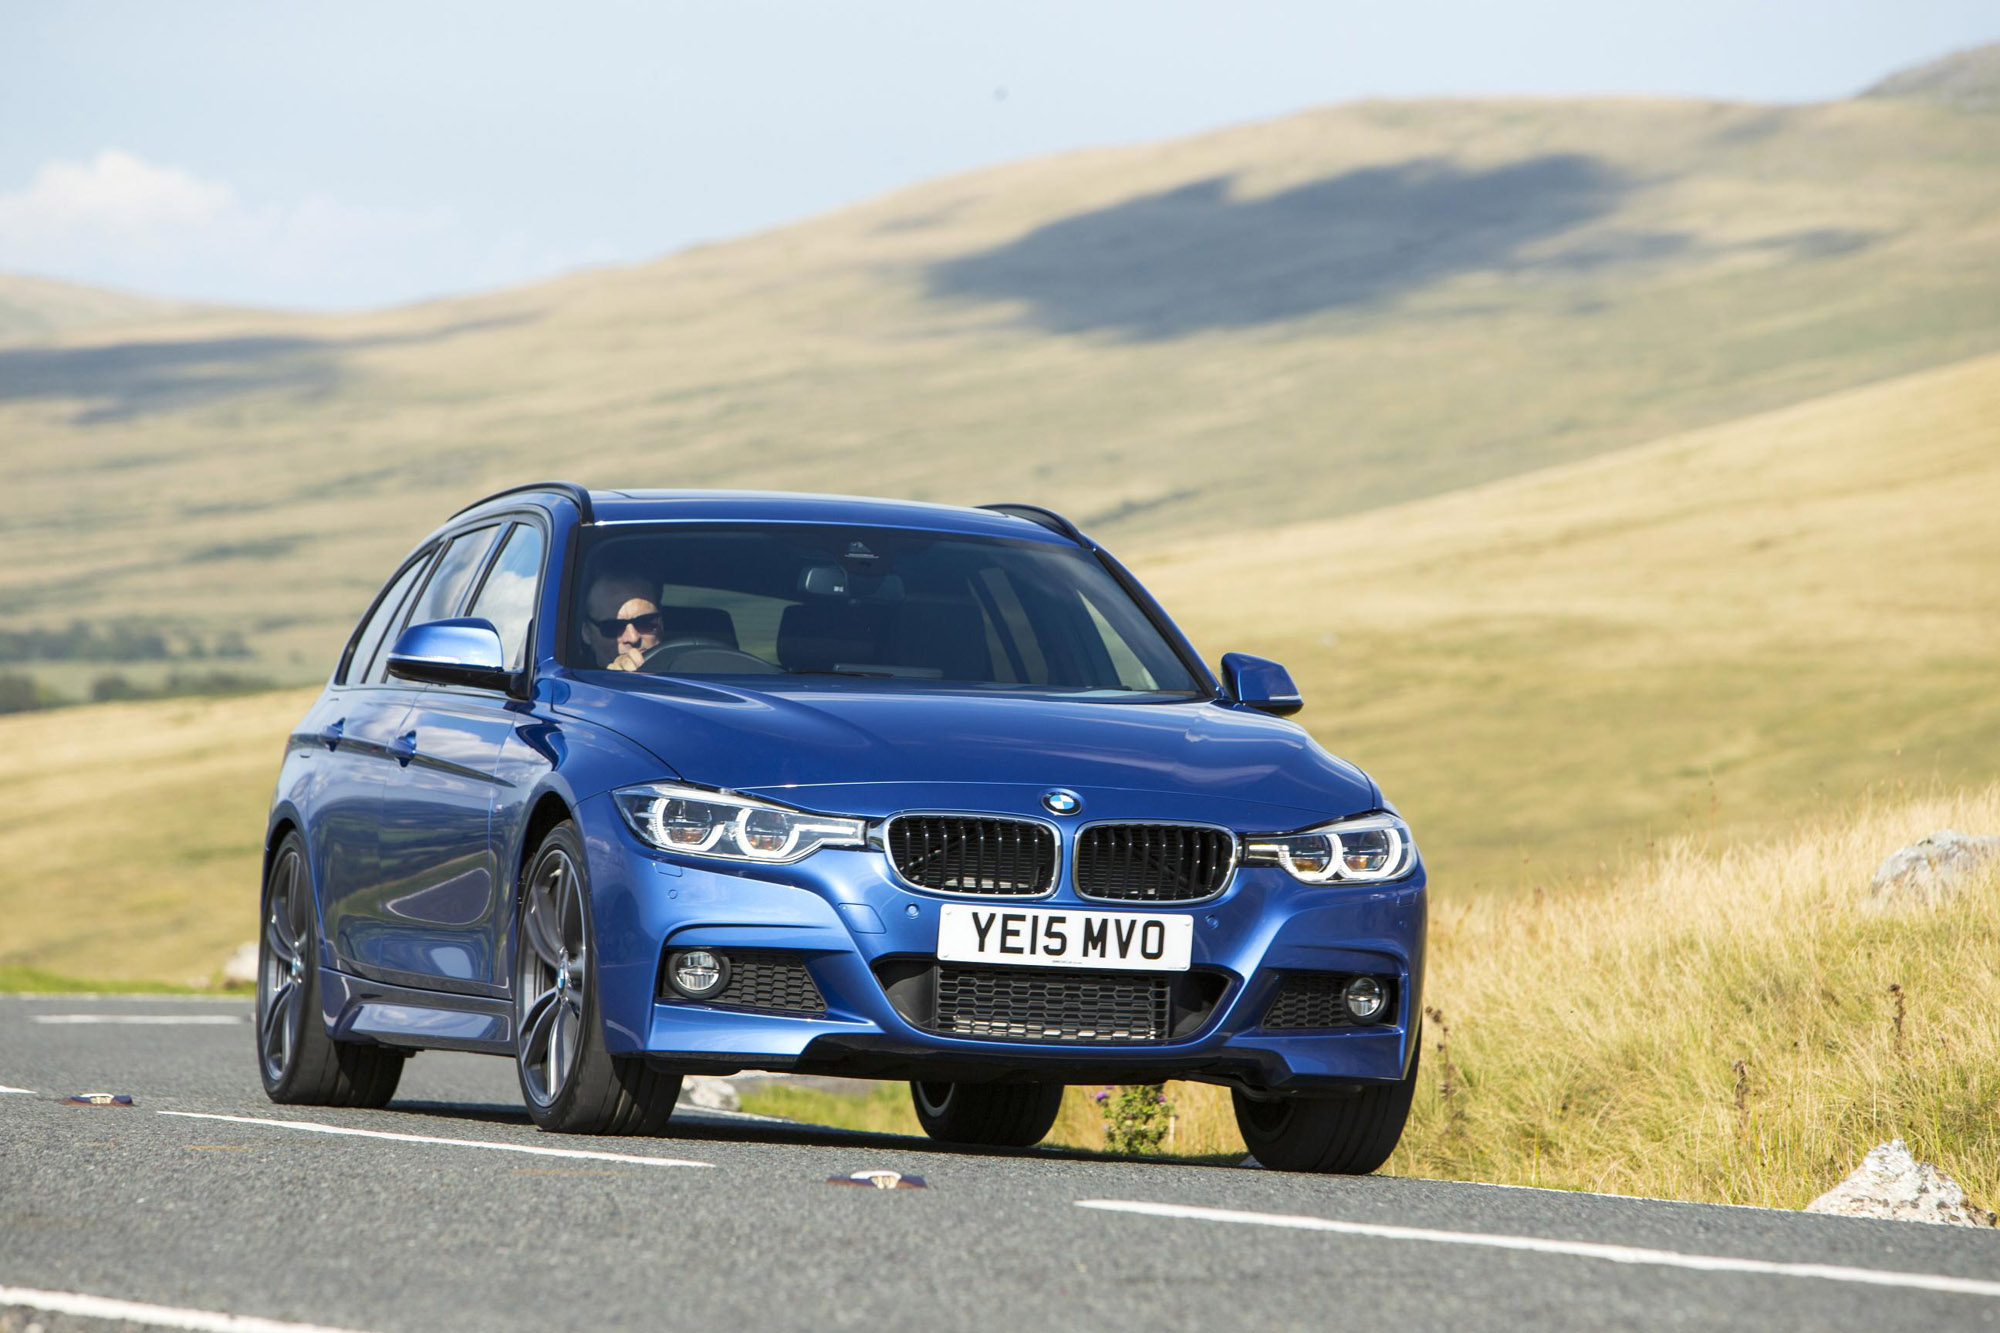 BMW 335d M Sport Touring review prices, specs and 060 time evo